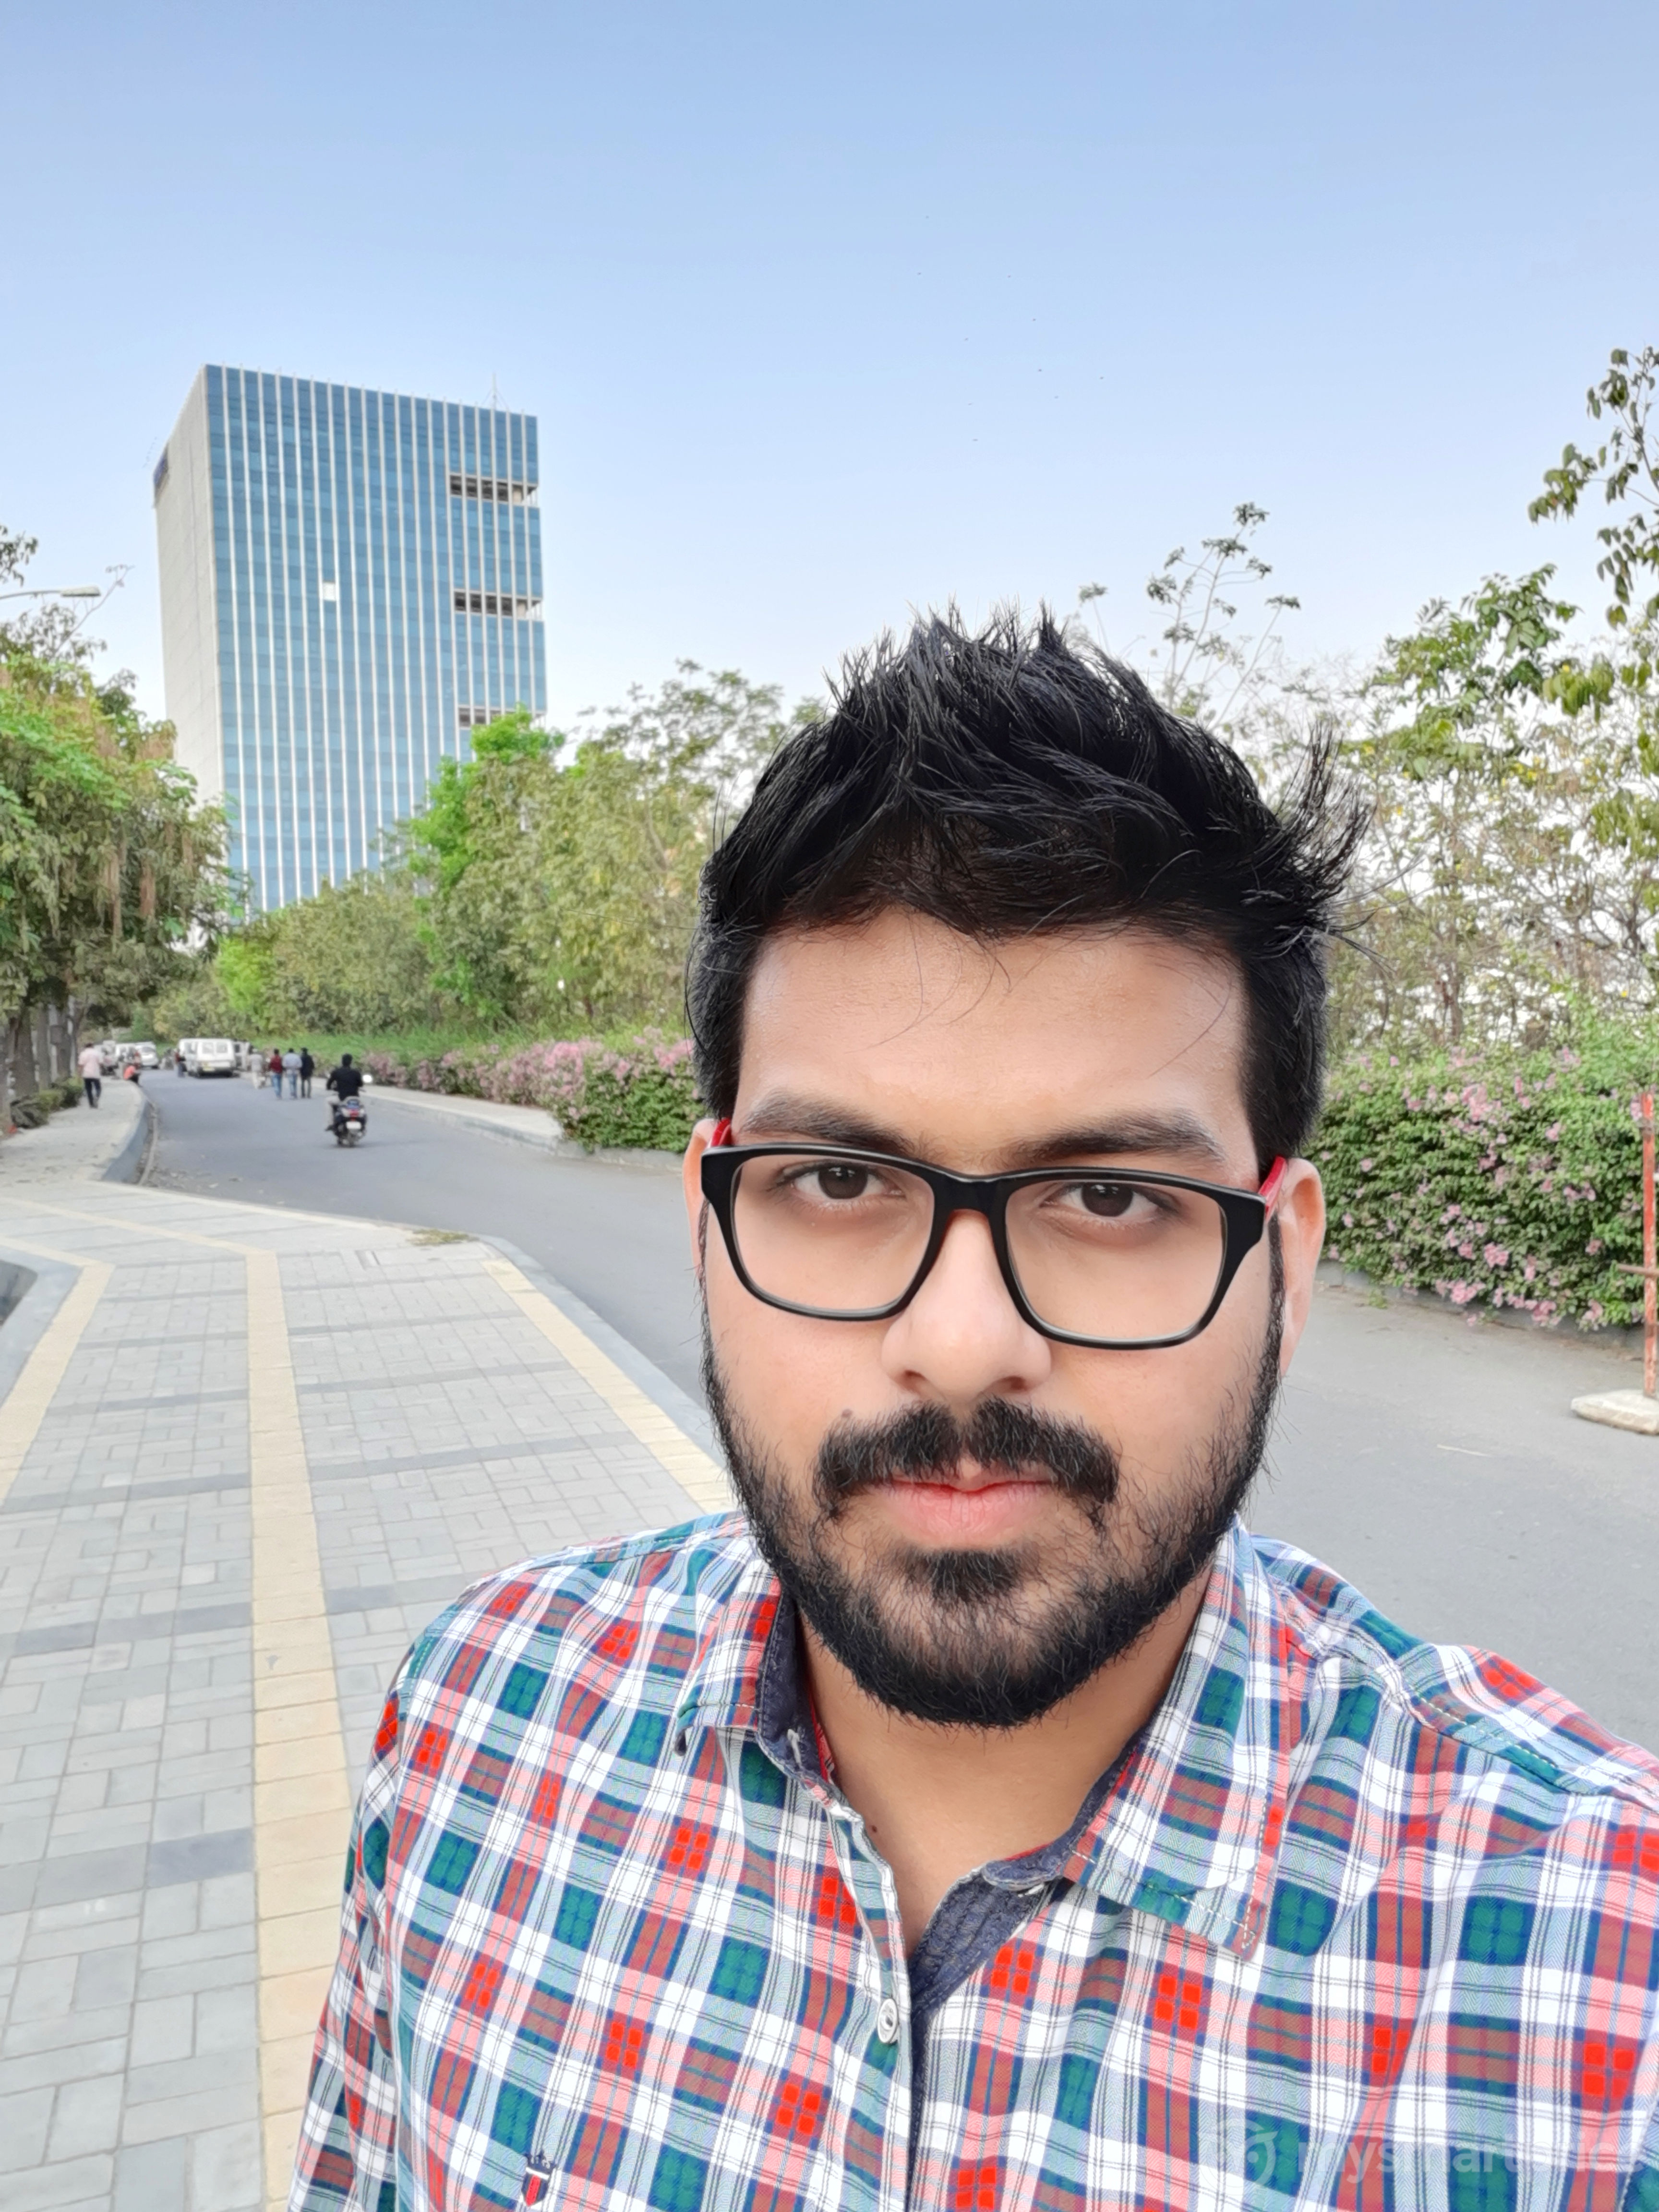 Samsung Galaxy M30 Review - Front-facing Camera Sample 05 (Beauty Mode On)